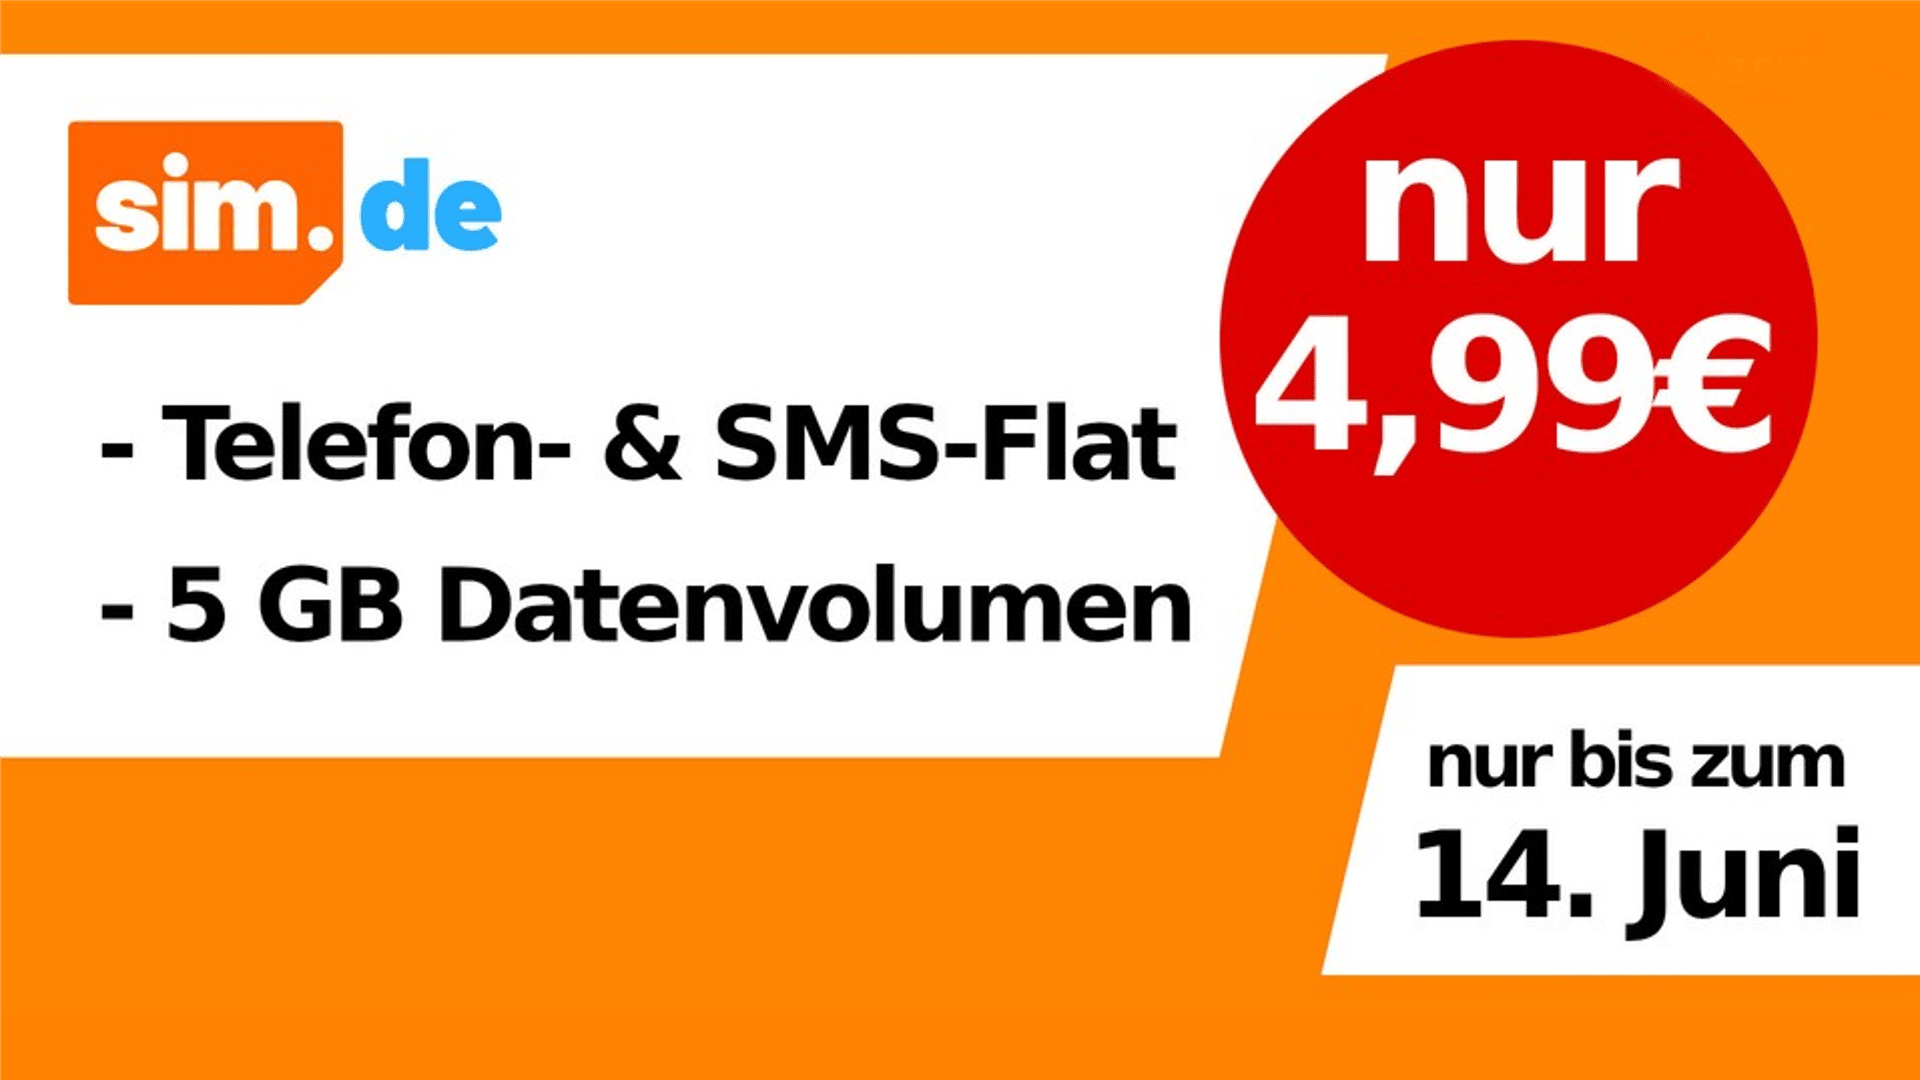 Only 4.99 euros per month: Mobile phone tariff with a flat rate and 5 GB now at the best price at Sim.de